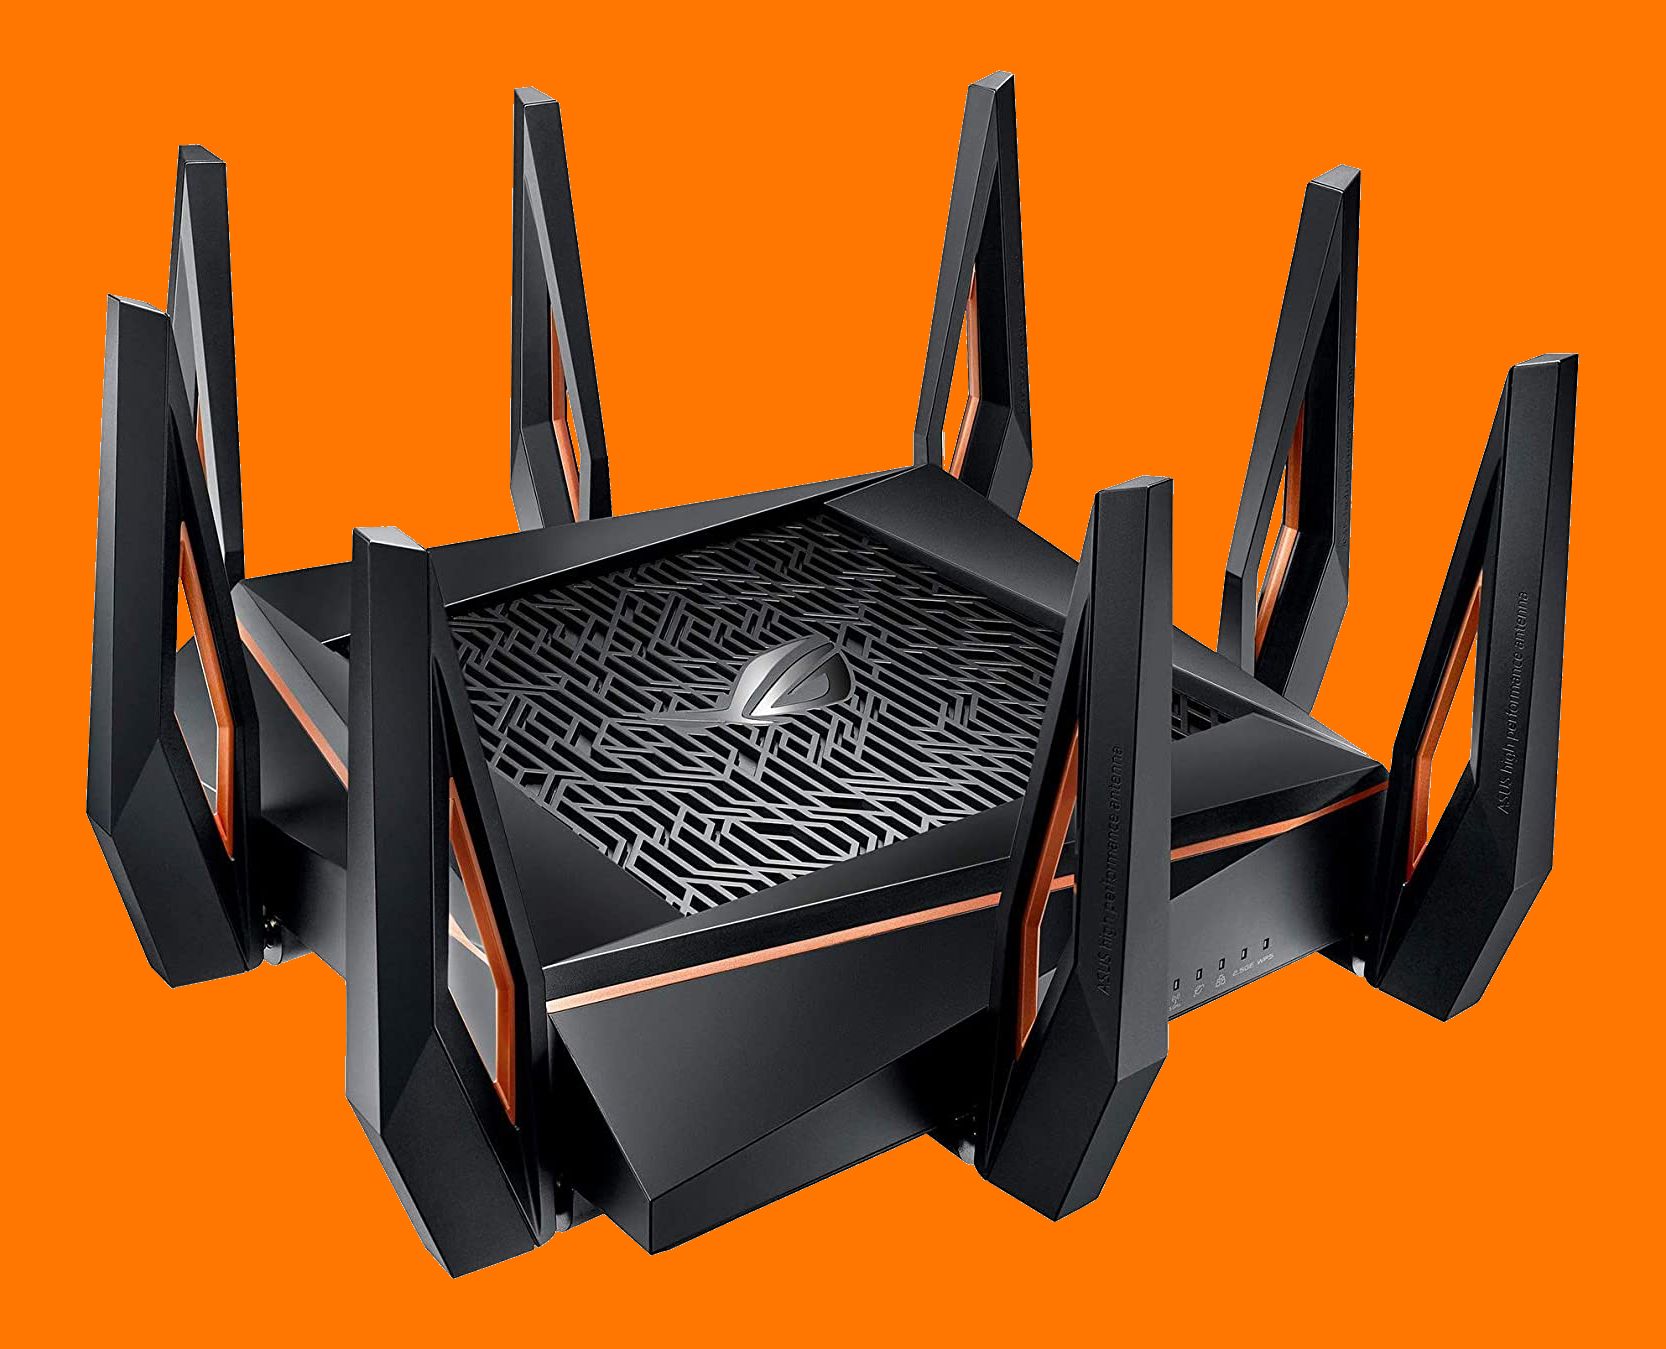 The Top 5 Best Wireless Router Brands to Consider